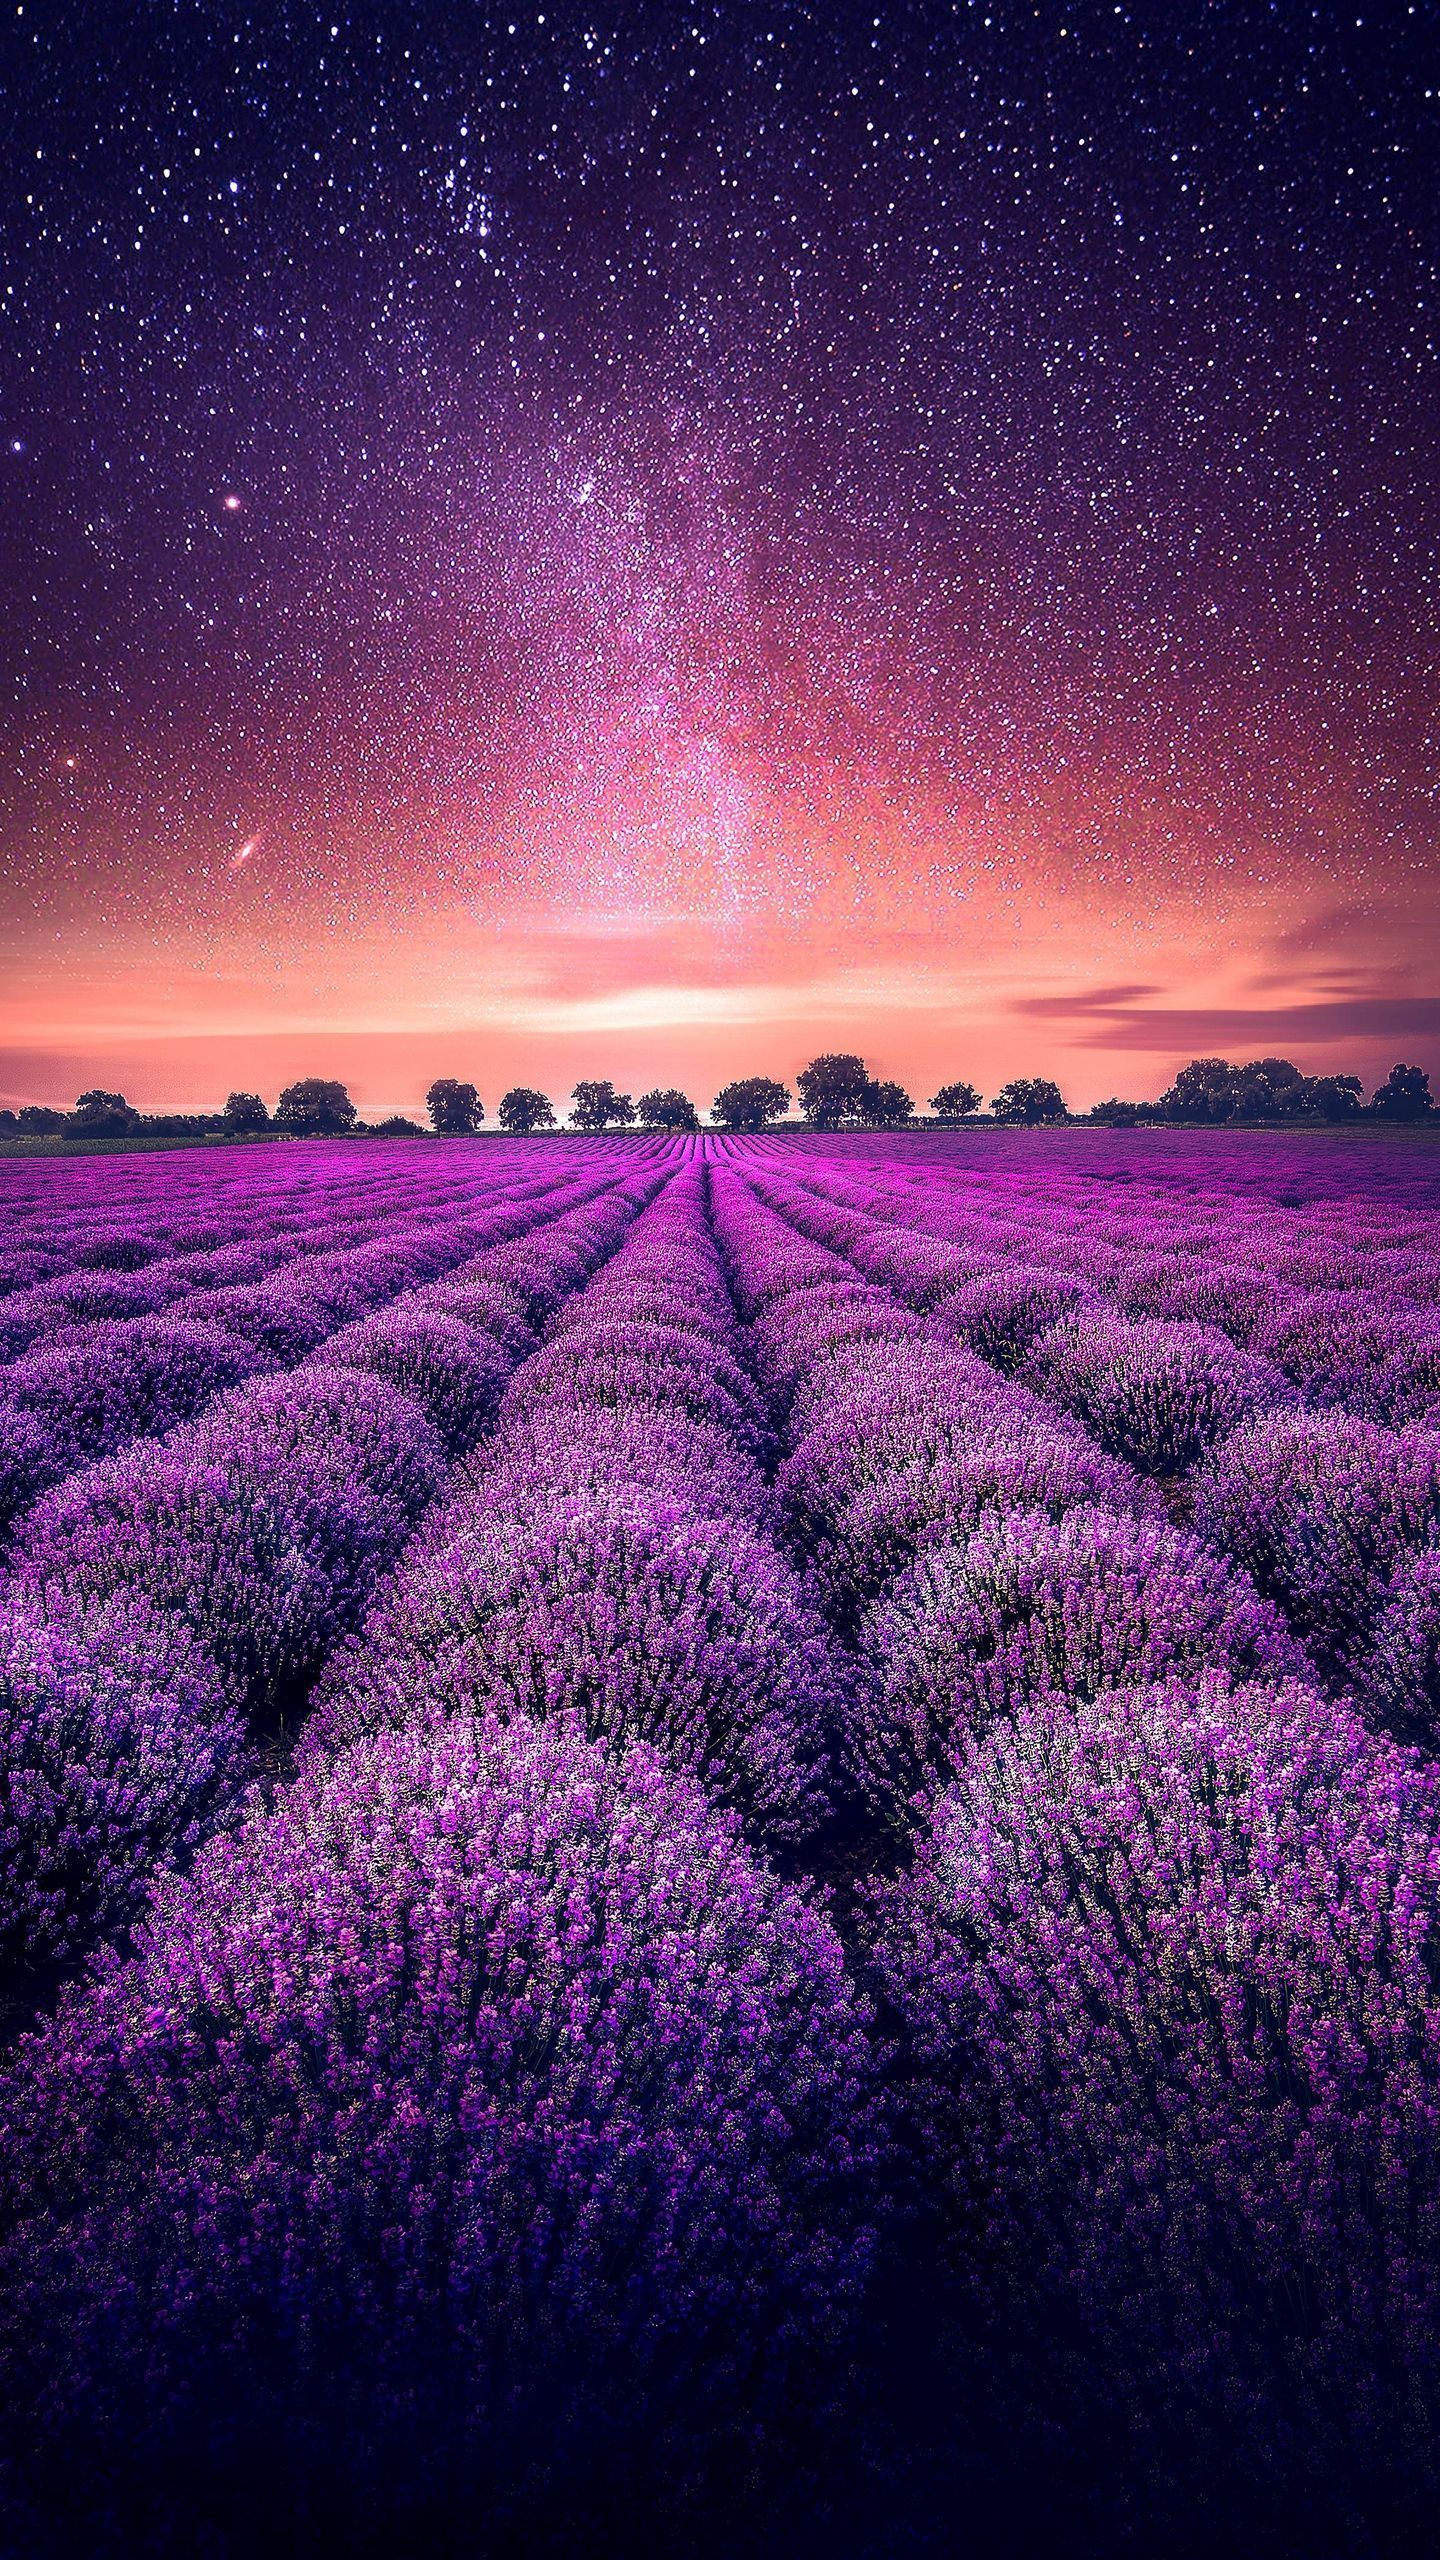 Lavender. apple. iphone. wallpaper#apple #iphone #lavender #wallpaper#apple #iphone #lavender #wallpaper. Field wallpaper, Nature photography, Lavender fields